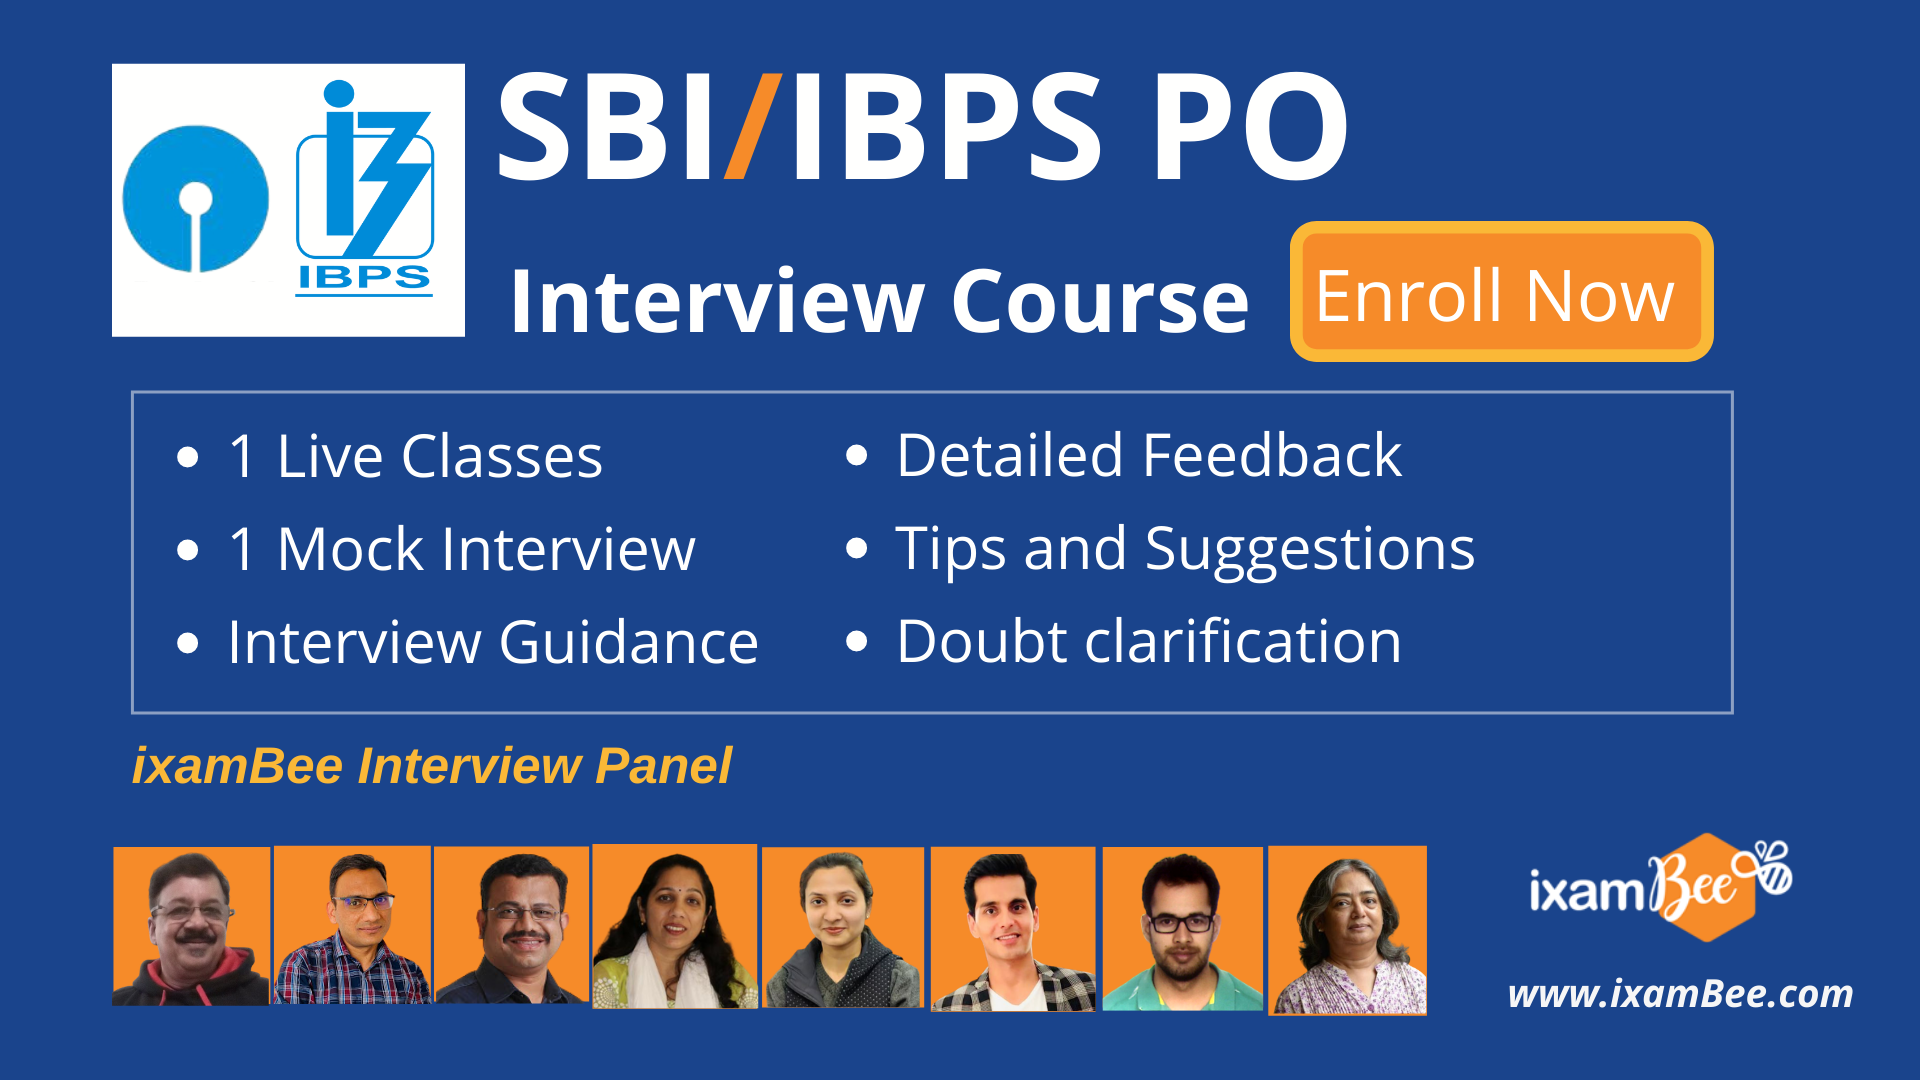 SBI/ IBPS Bank PO Interview Course